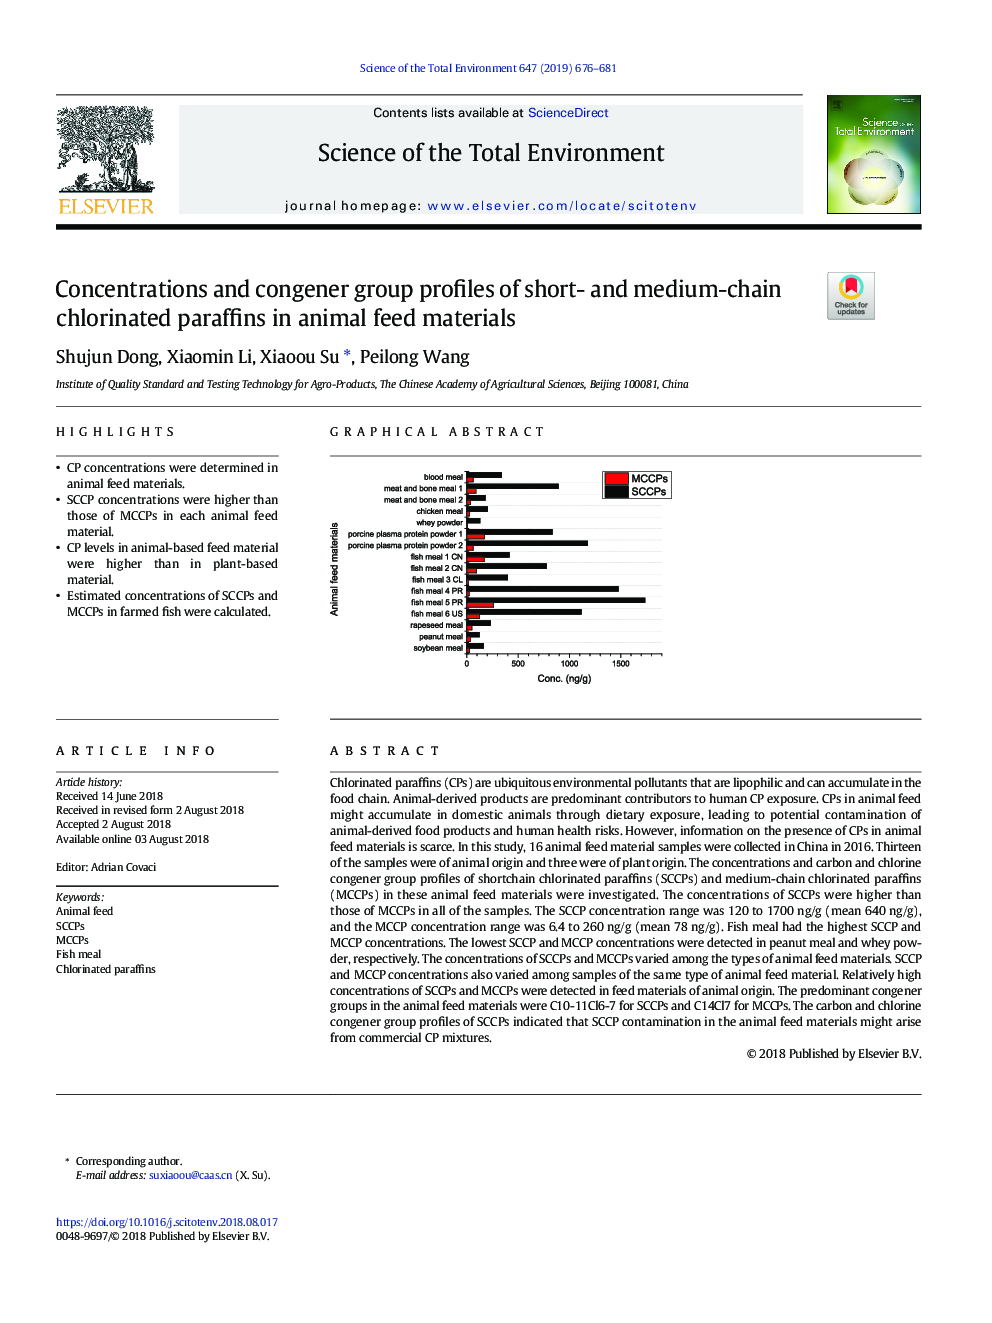 Concentrations and congener group profiles of short- and medium-chain chlorinated paraffins in animal feed materials